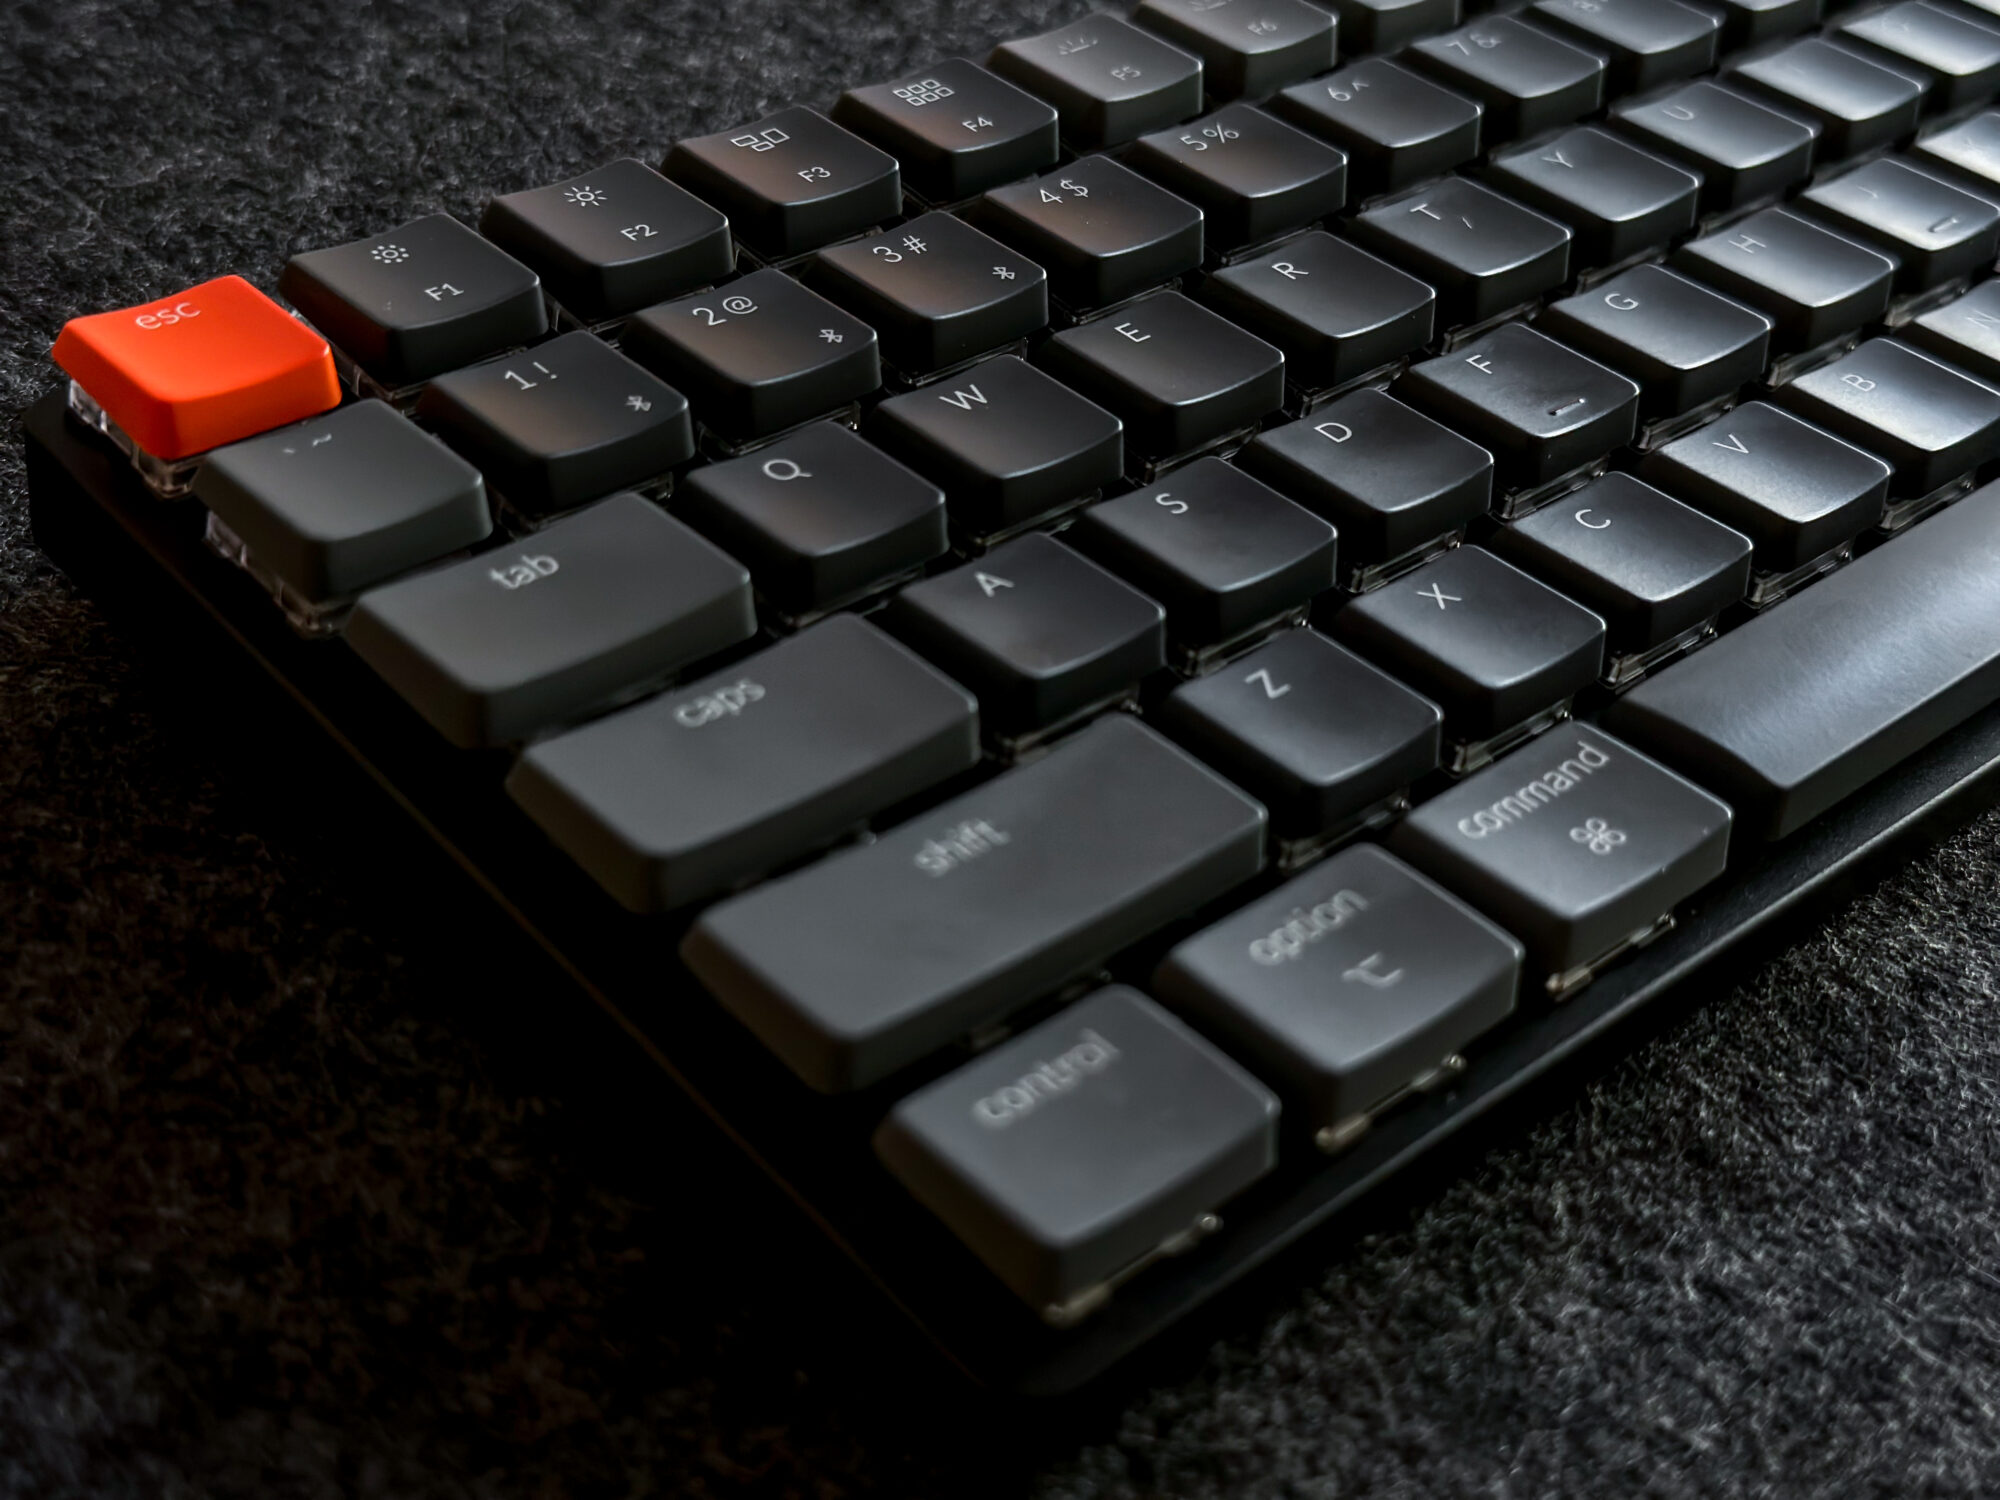 Keys Keyboard Computer Free Stock Picture